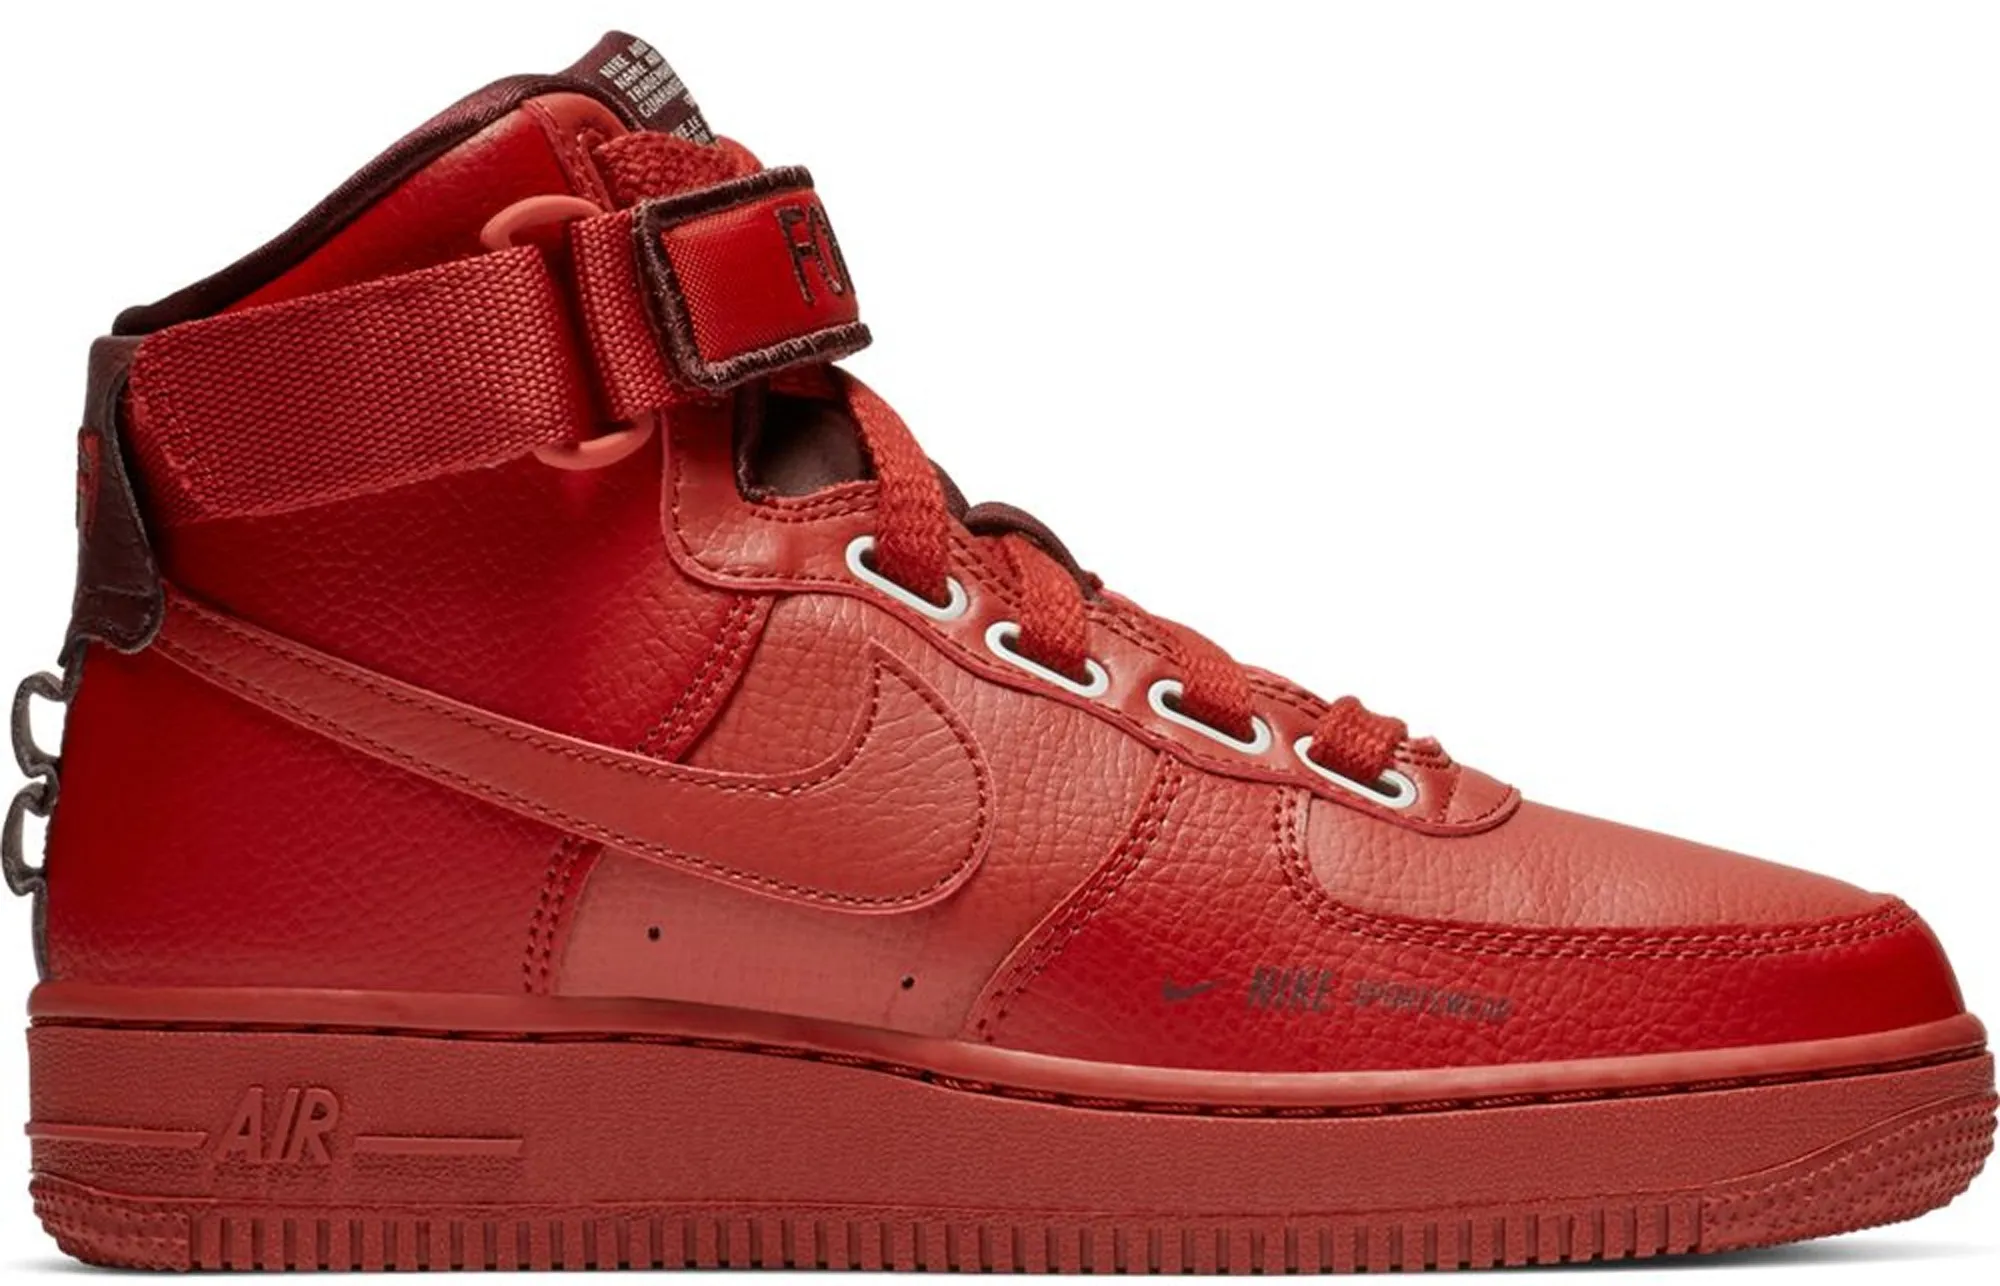 Nike Air Force 1 High Utility Dune Red 